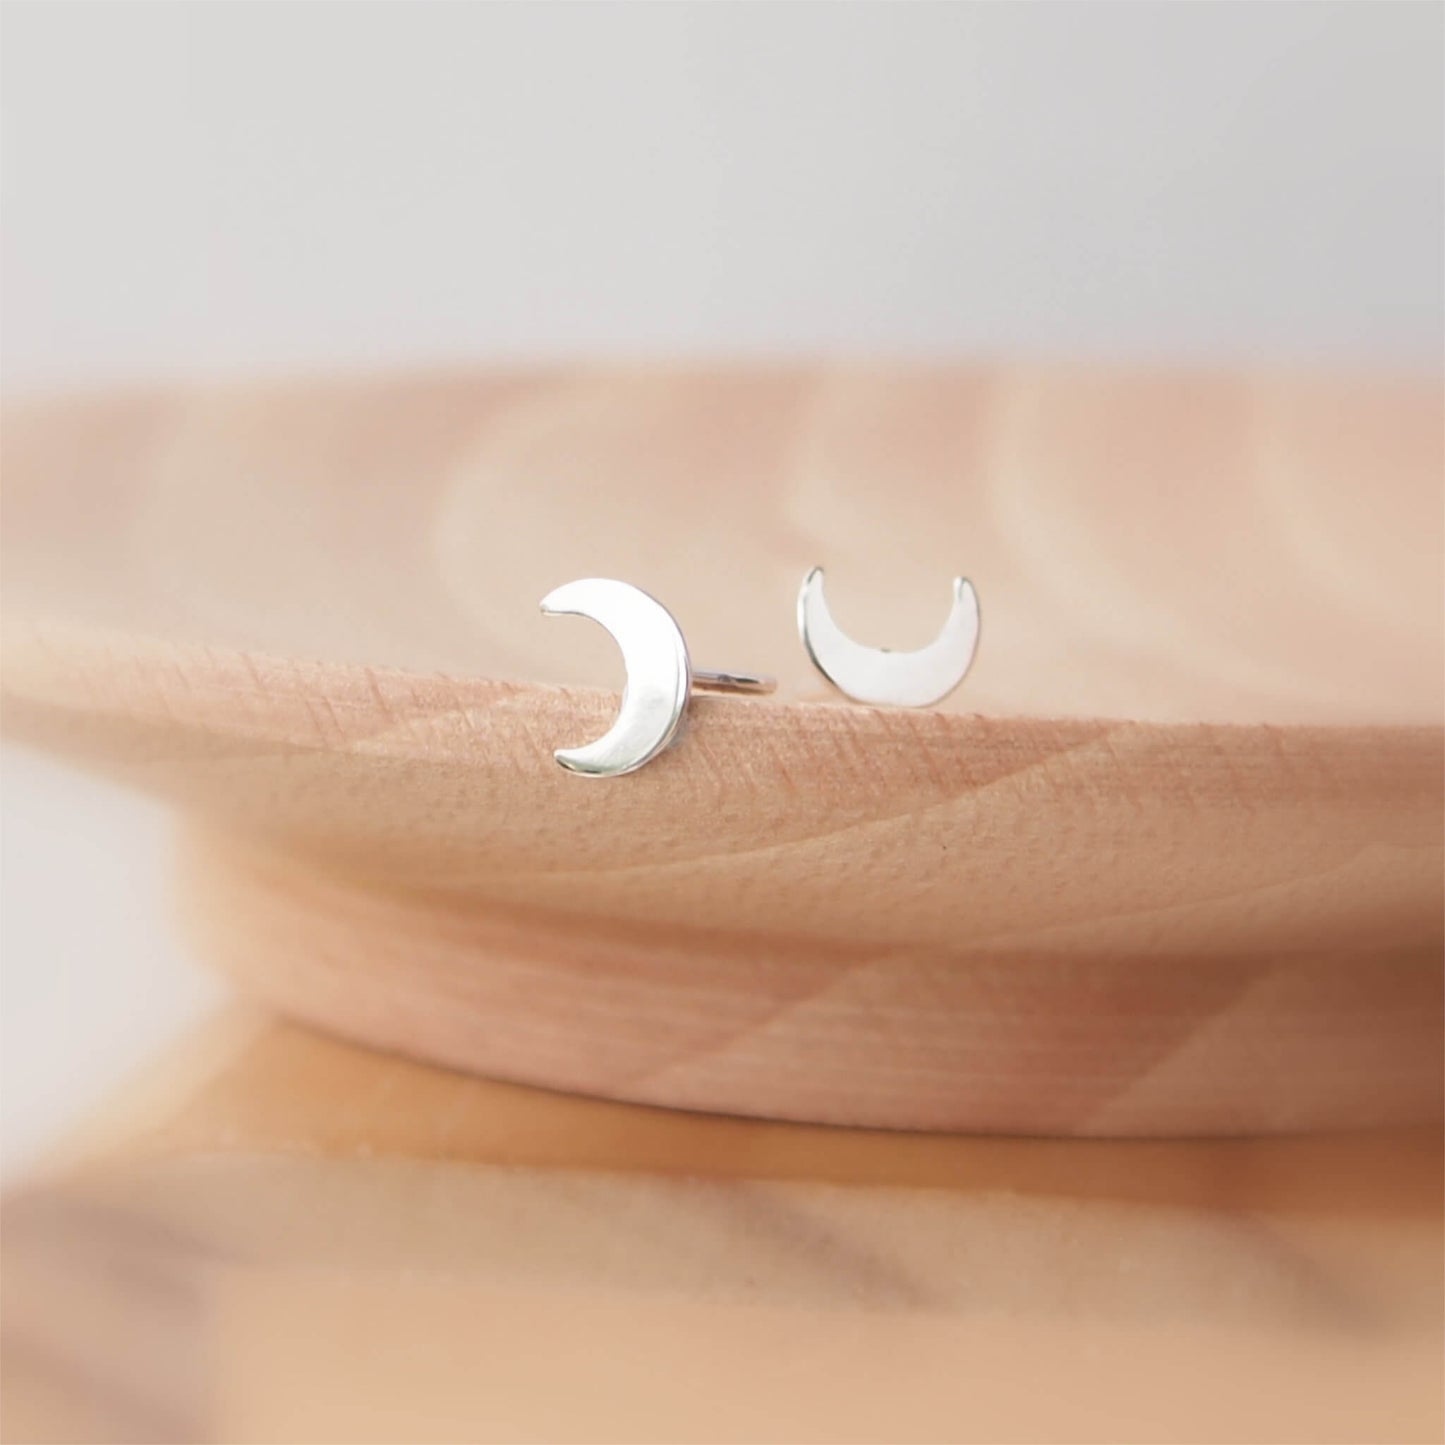 Simple Silver Moon Studs in Sterling Silver measuring a small 11mm in size. Suitable for most ear piercings where a normal stud can be worn and looks great in ears with multiple piercings. Handmade by maram jewellery in Scotland UK